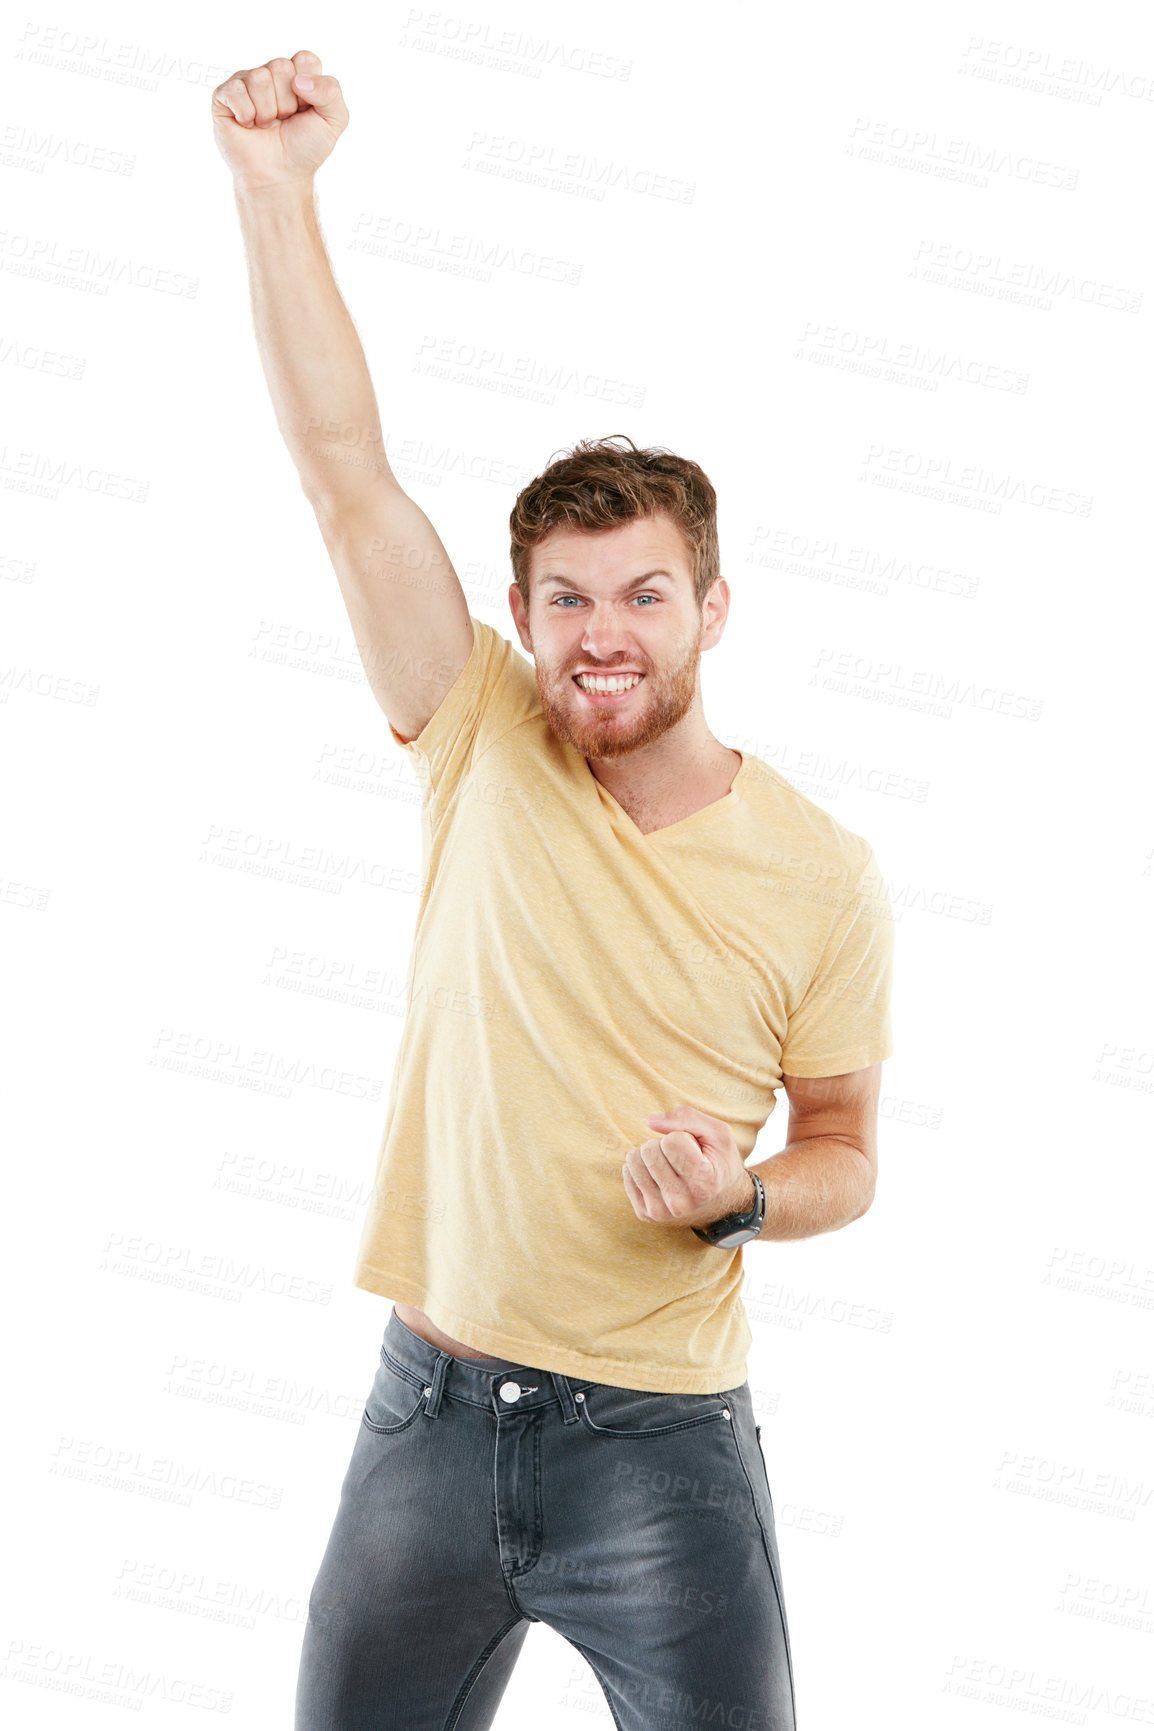 Buy stock photo Studio portrait of a young man punching the air triumphantly against a white background